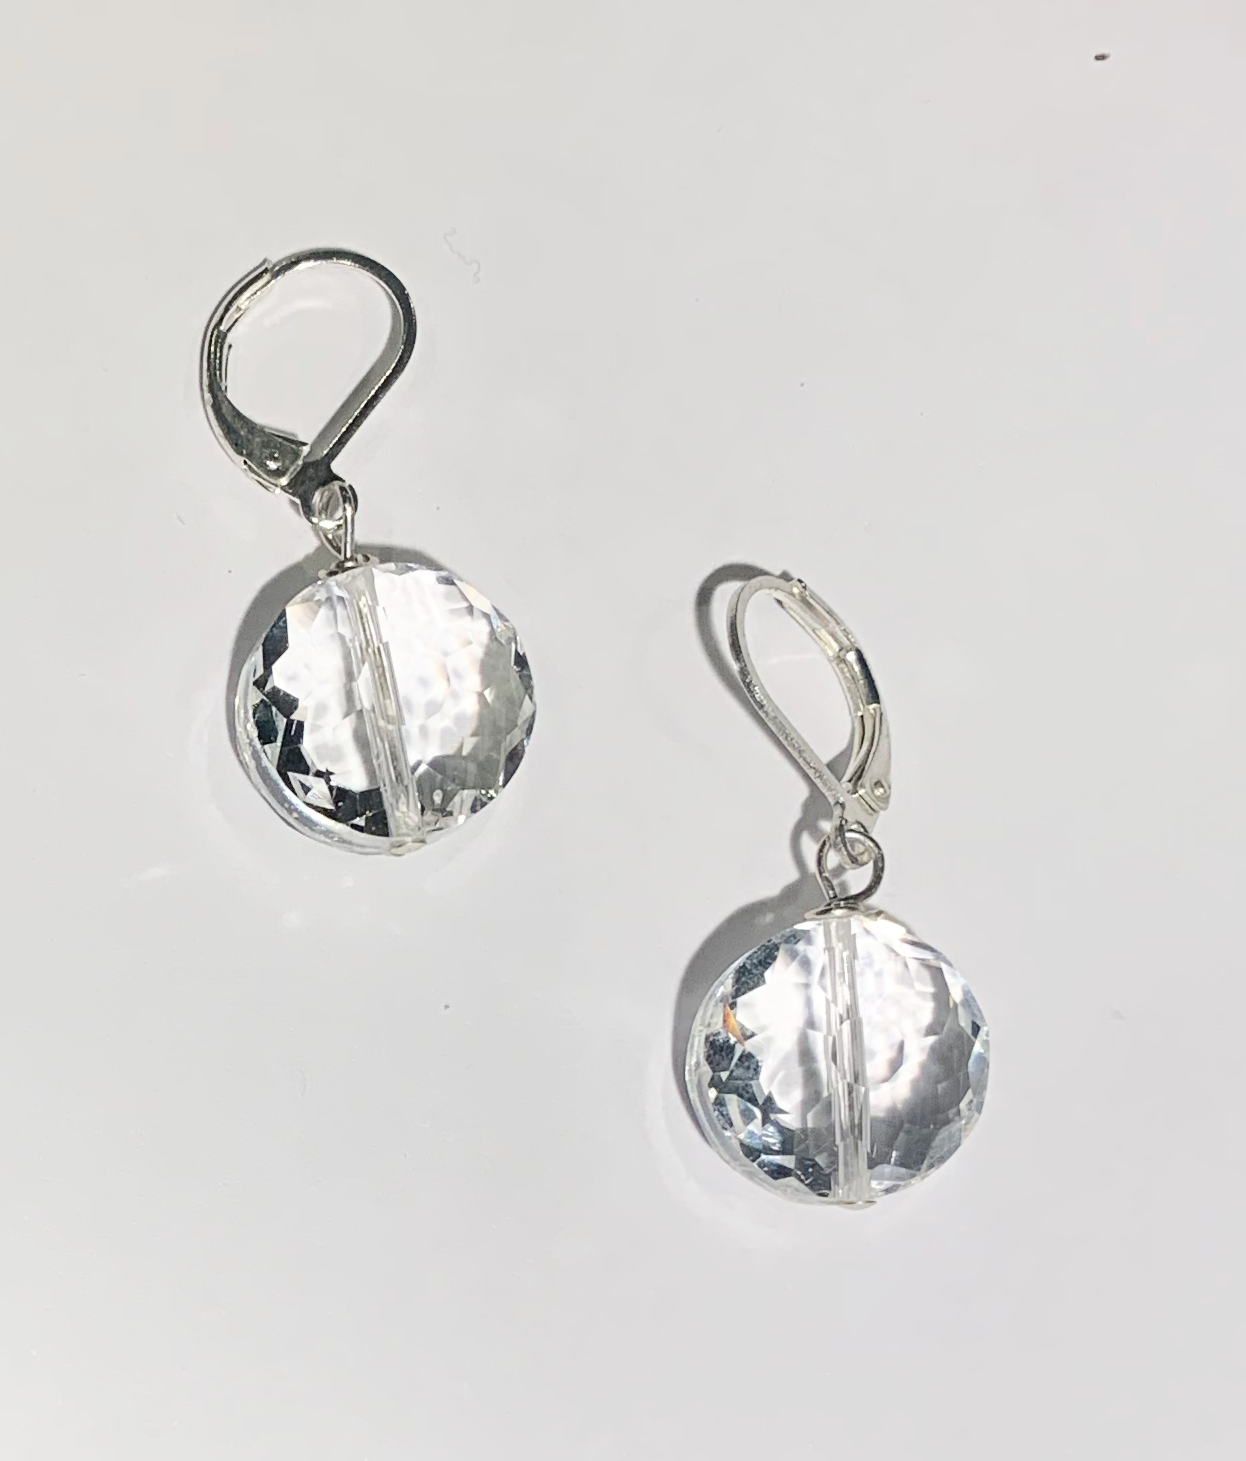 Clear Quartz Faceted Crystal Earrings with Sterling Silver Lever Back Earrings